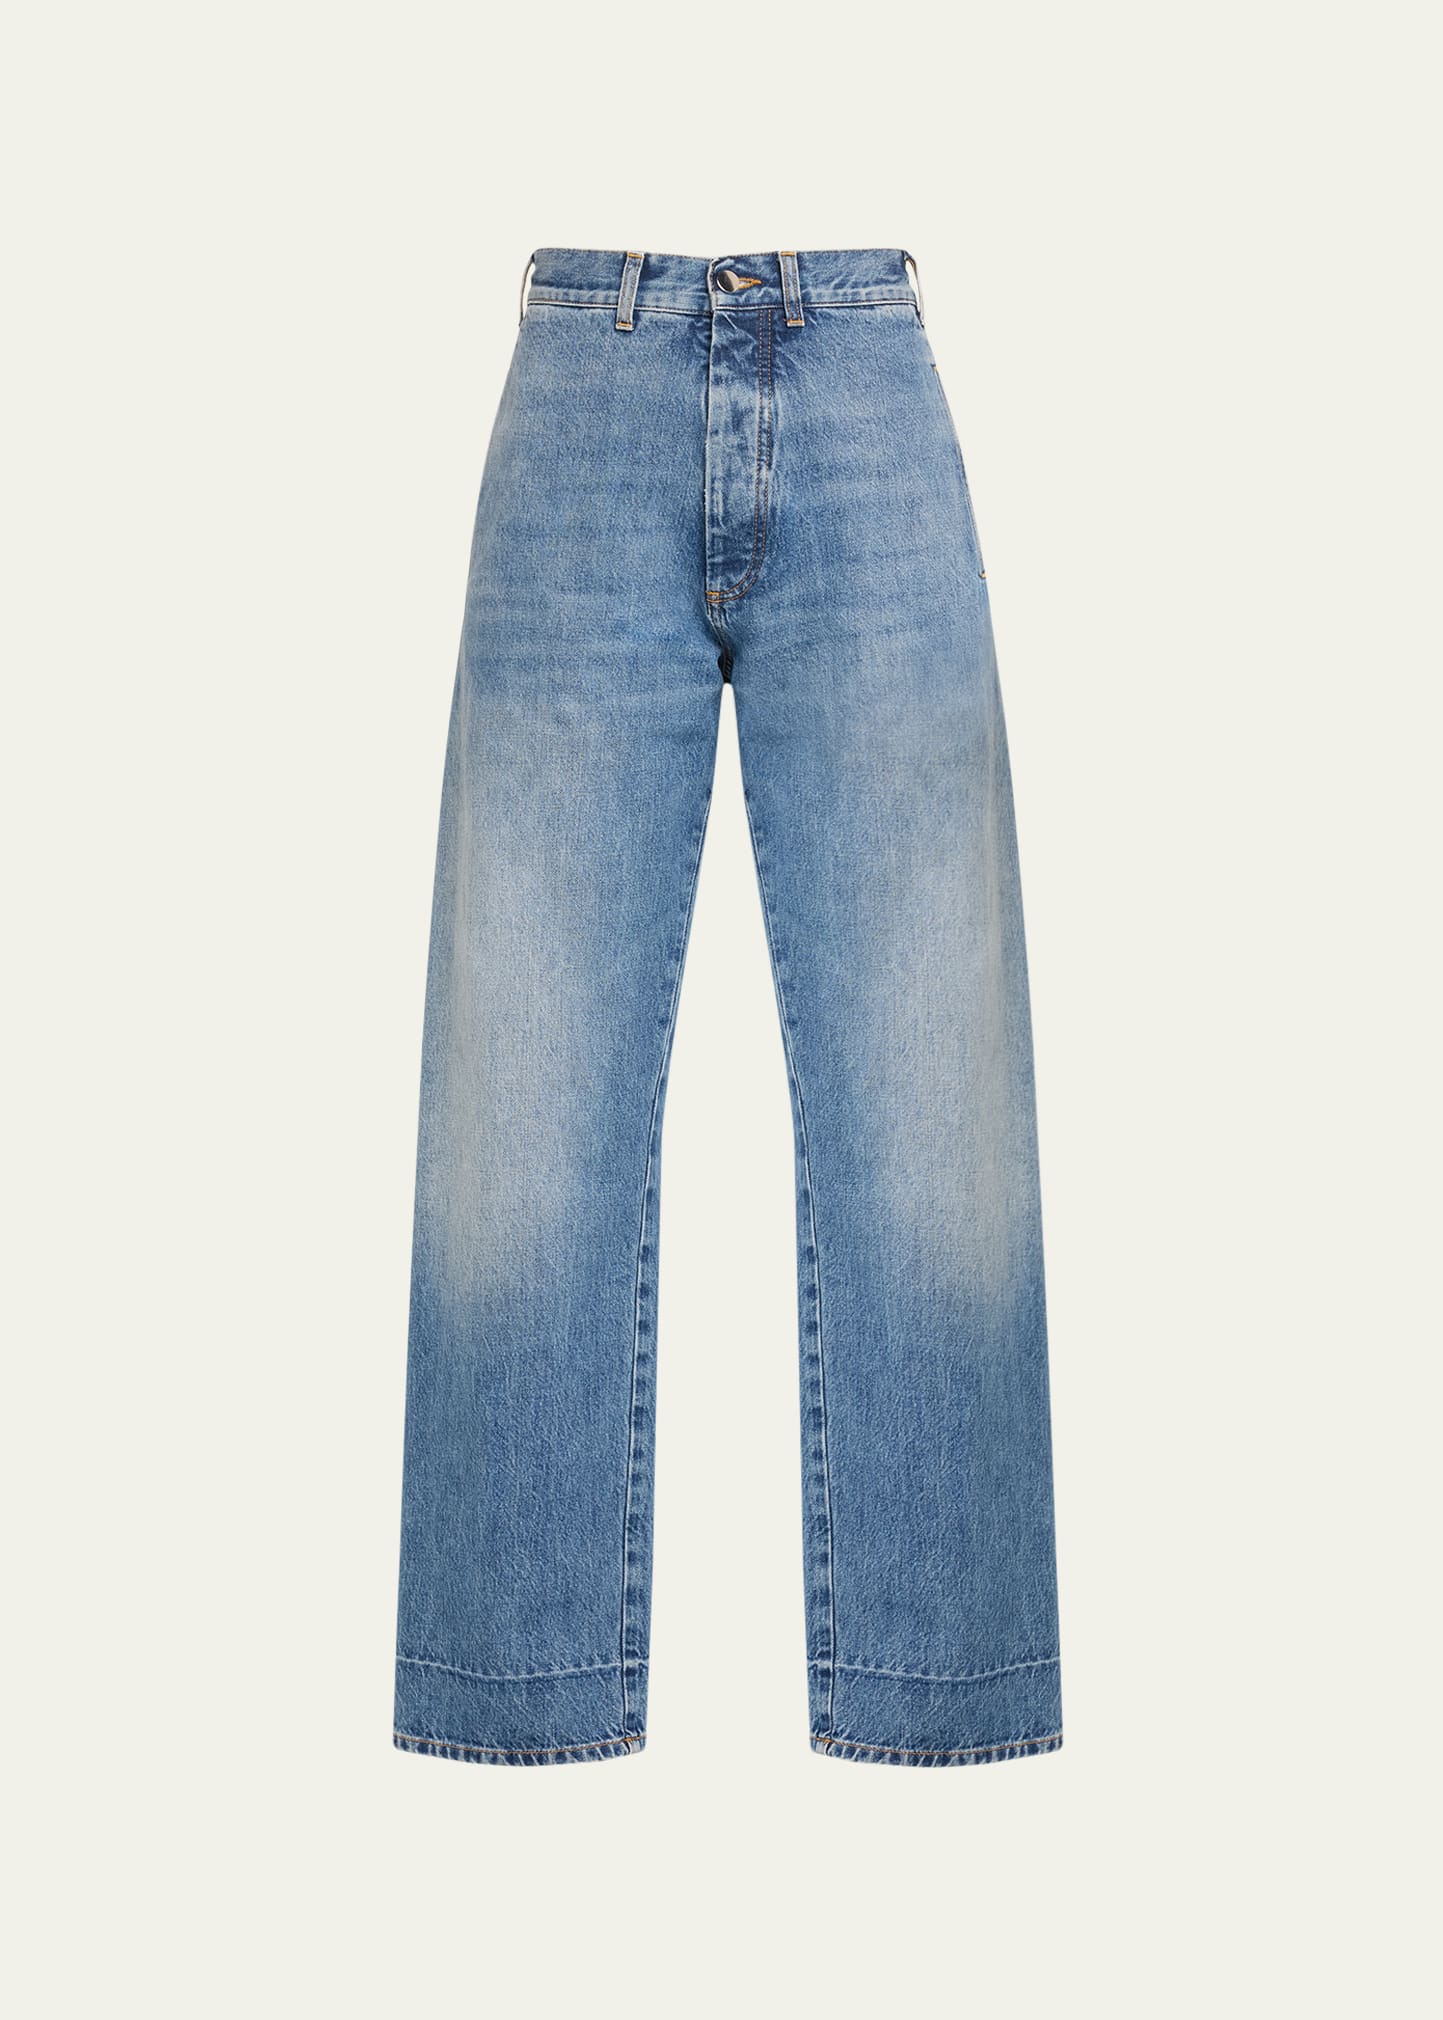 Denim Belted Trousers